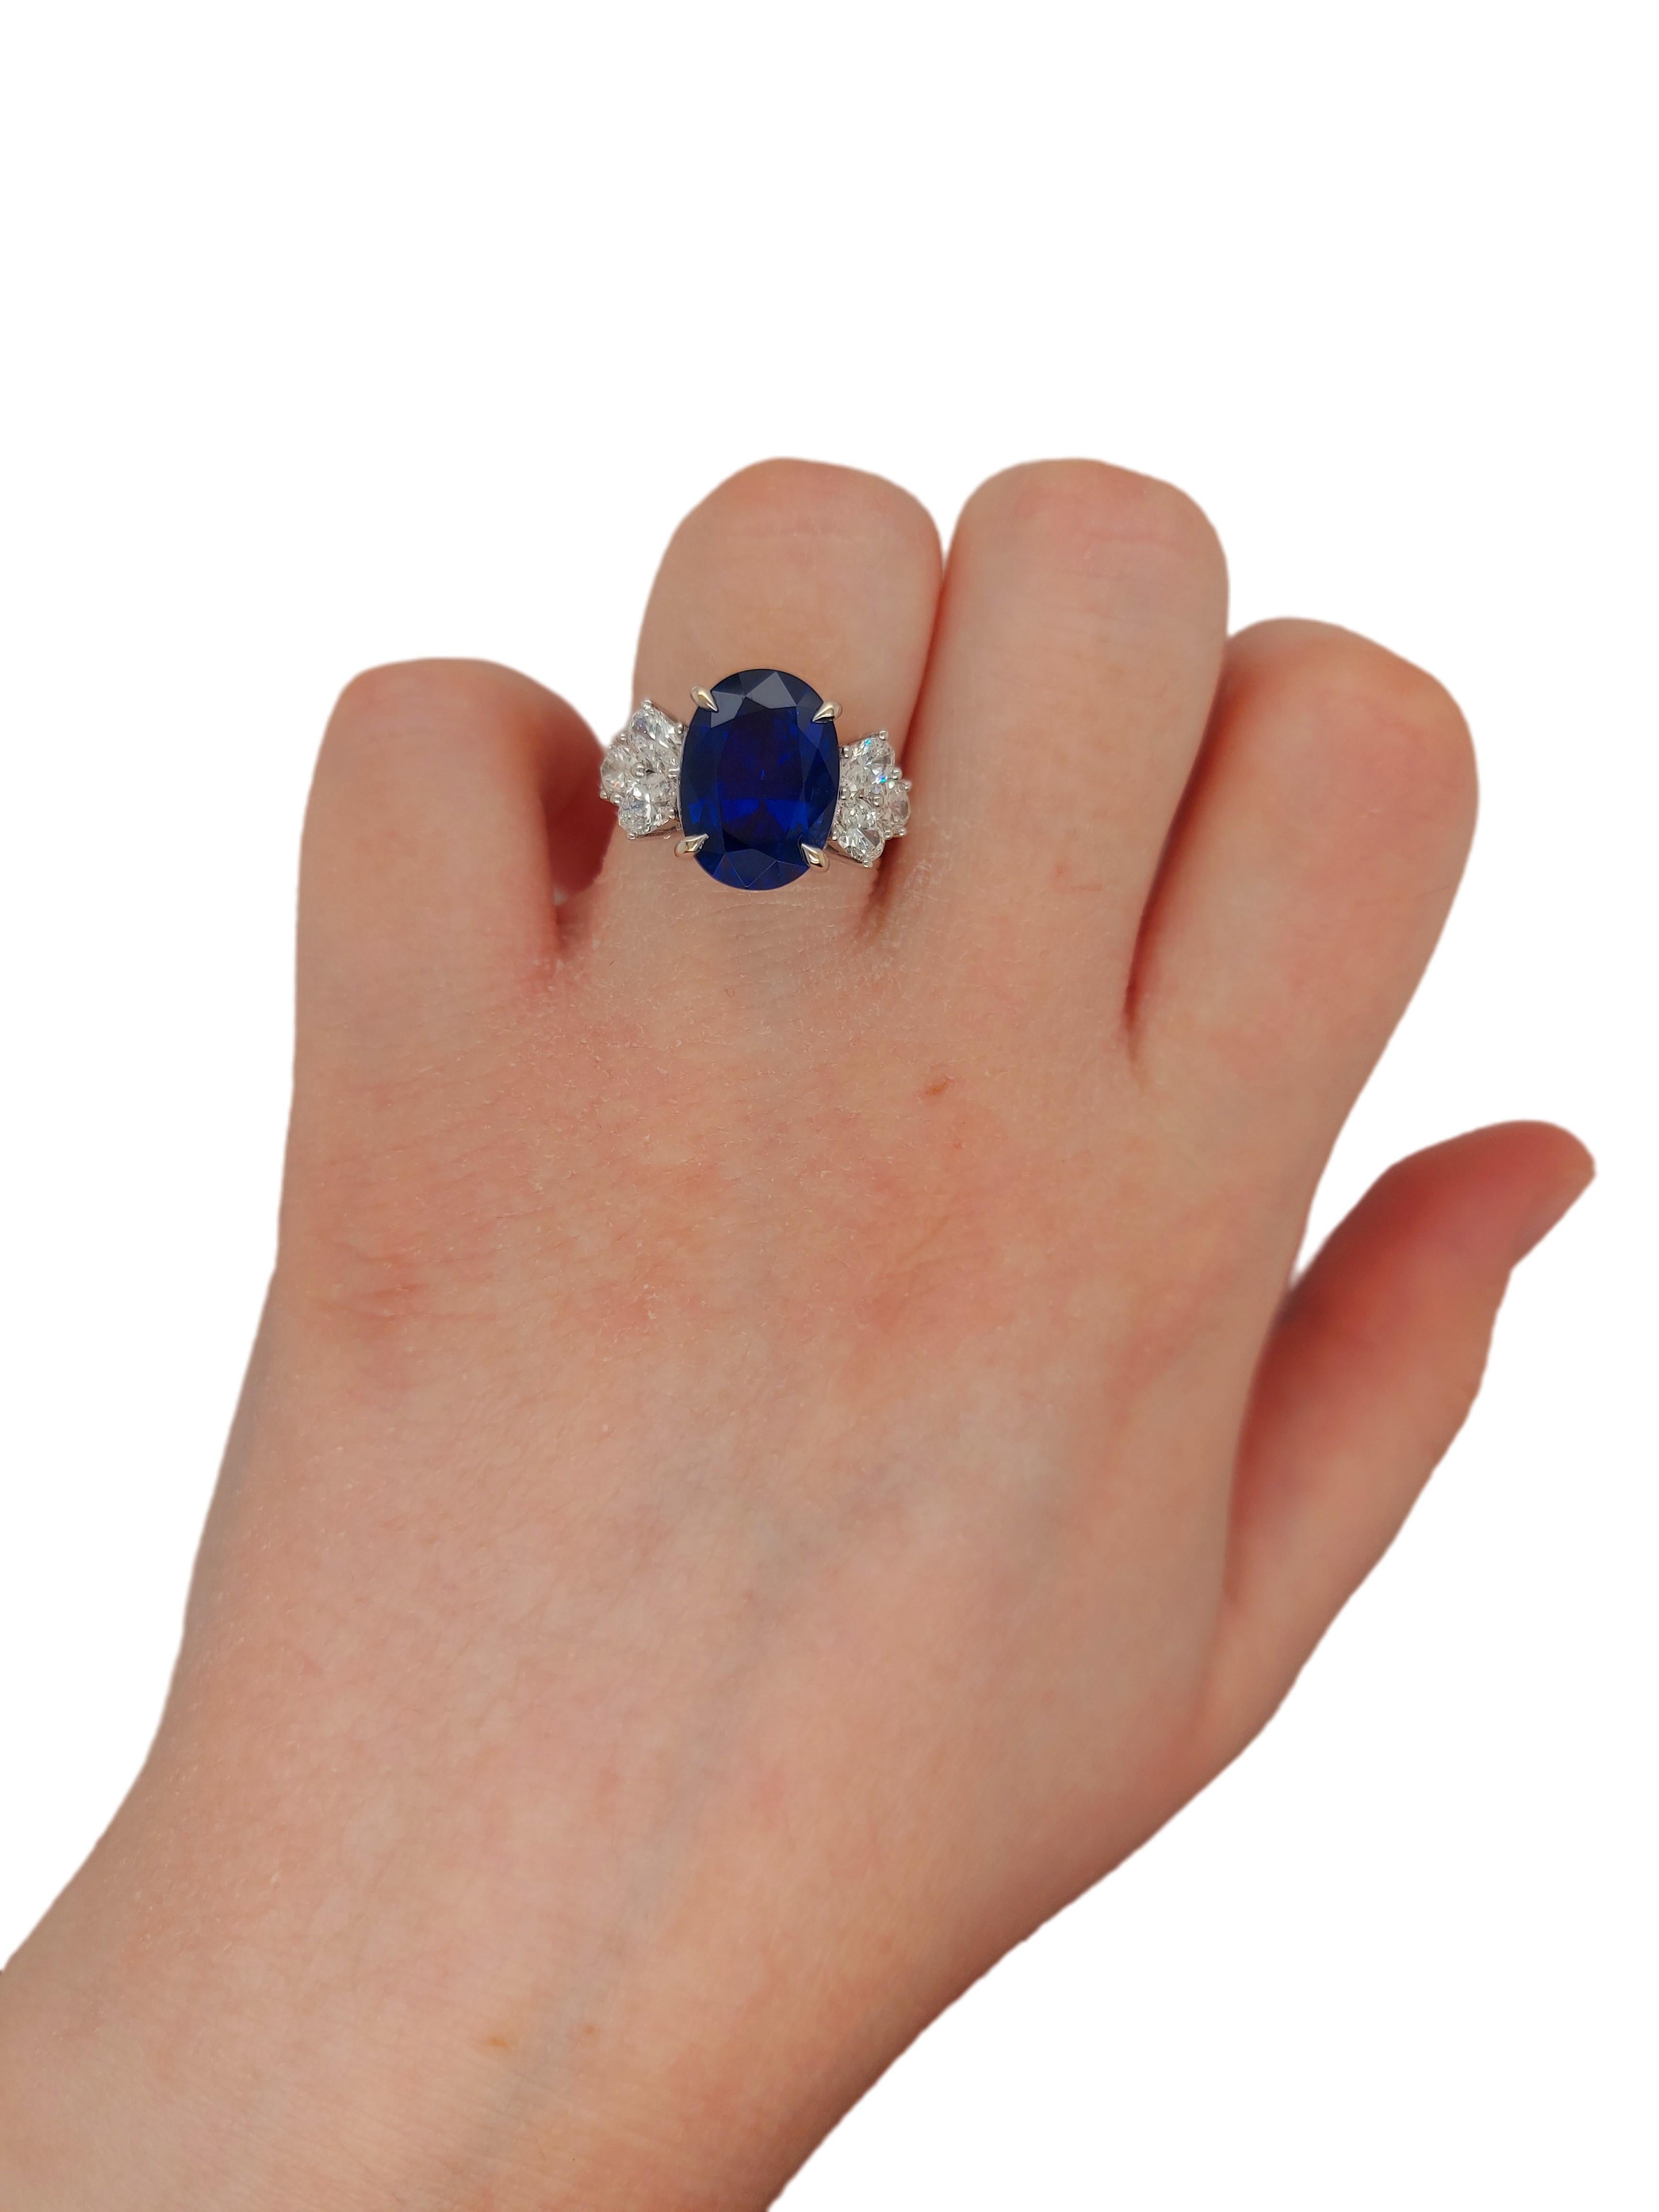 18 Karat White Gold Ring Set with a 7 Carat Sapphire and Diamonds 11